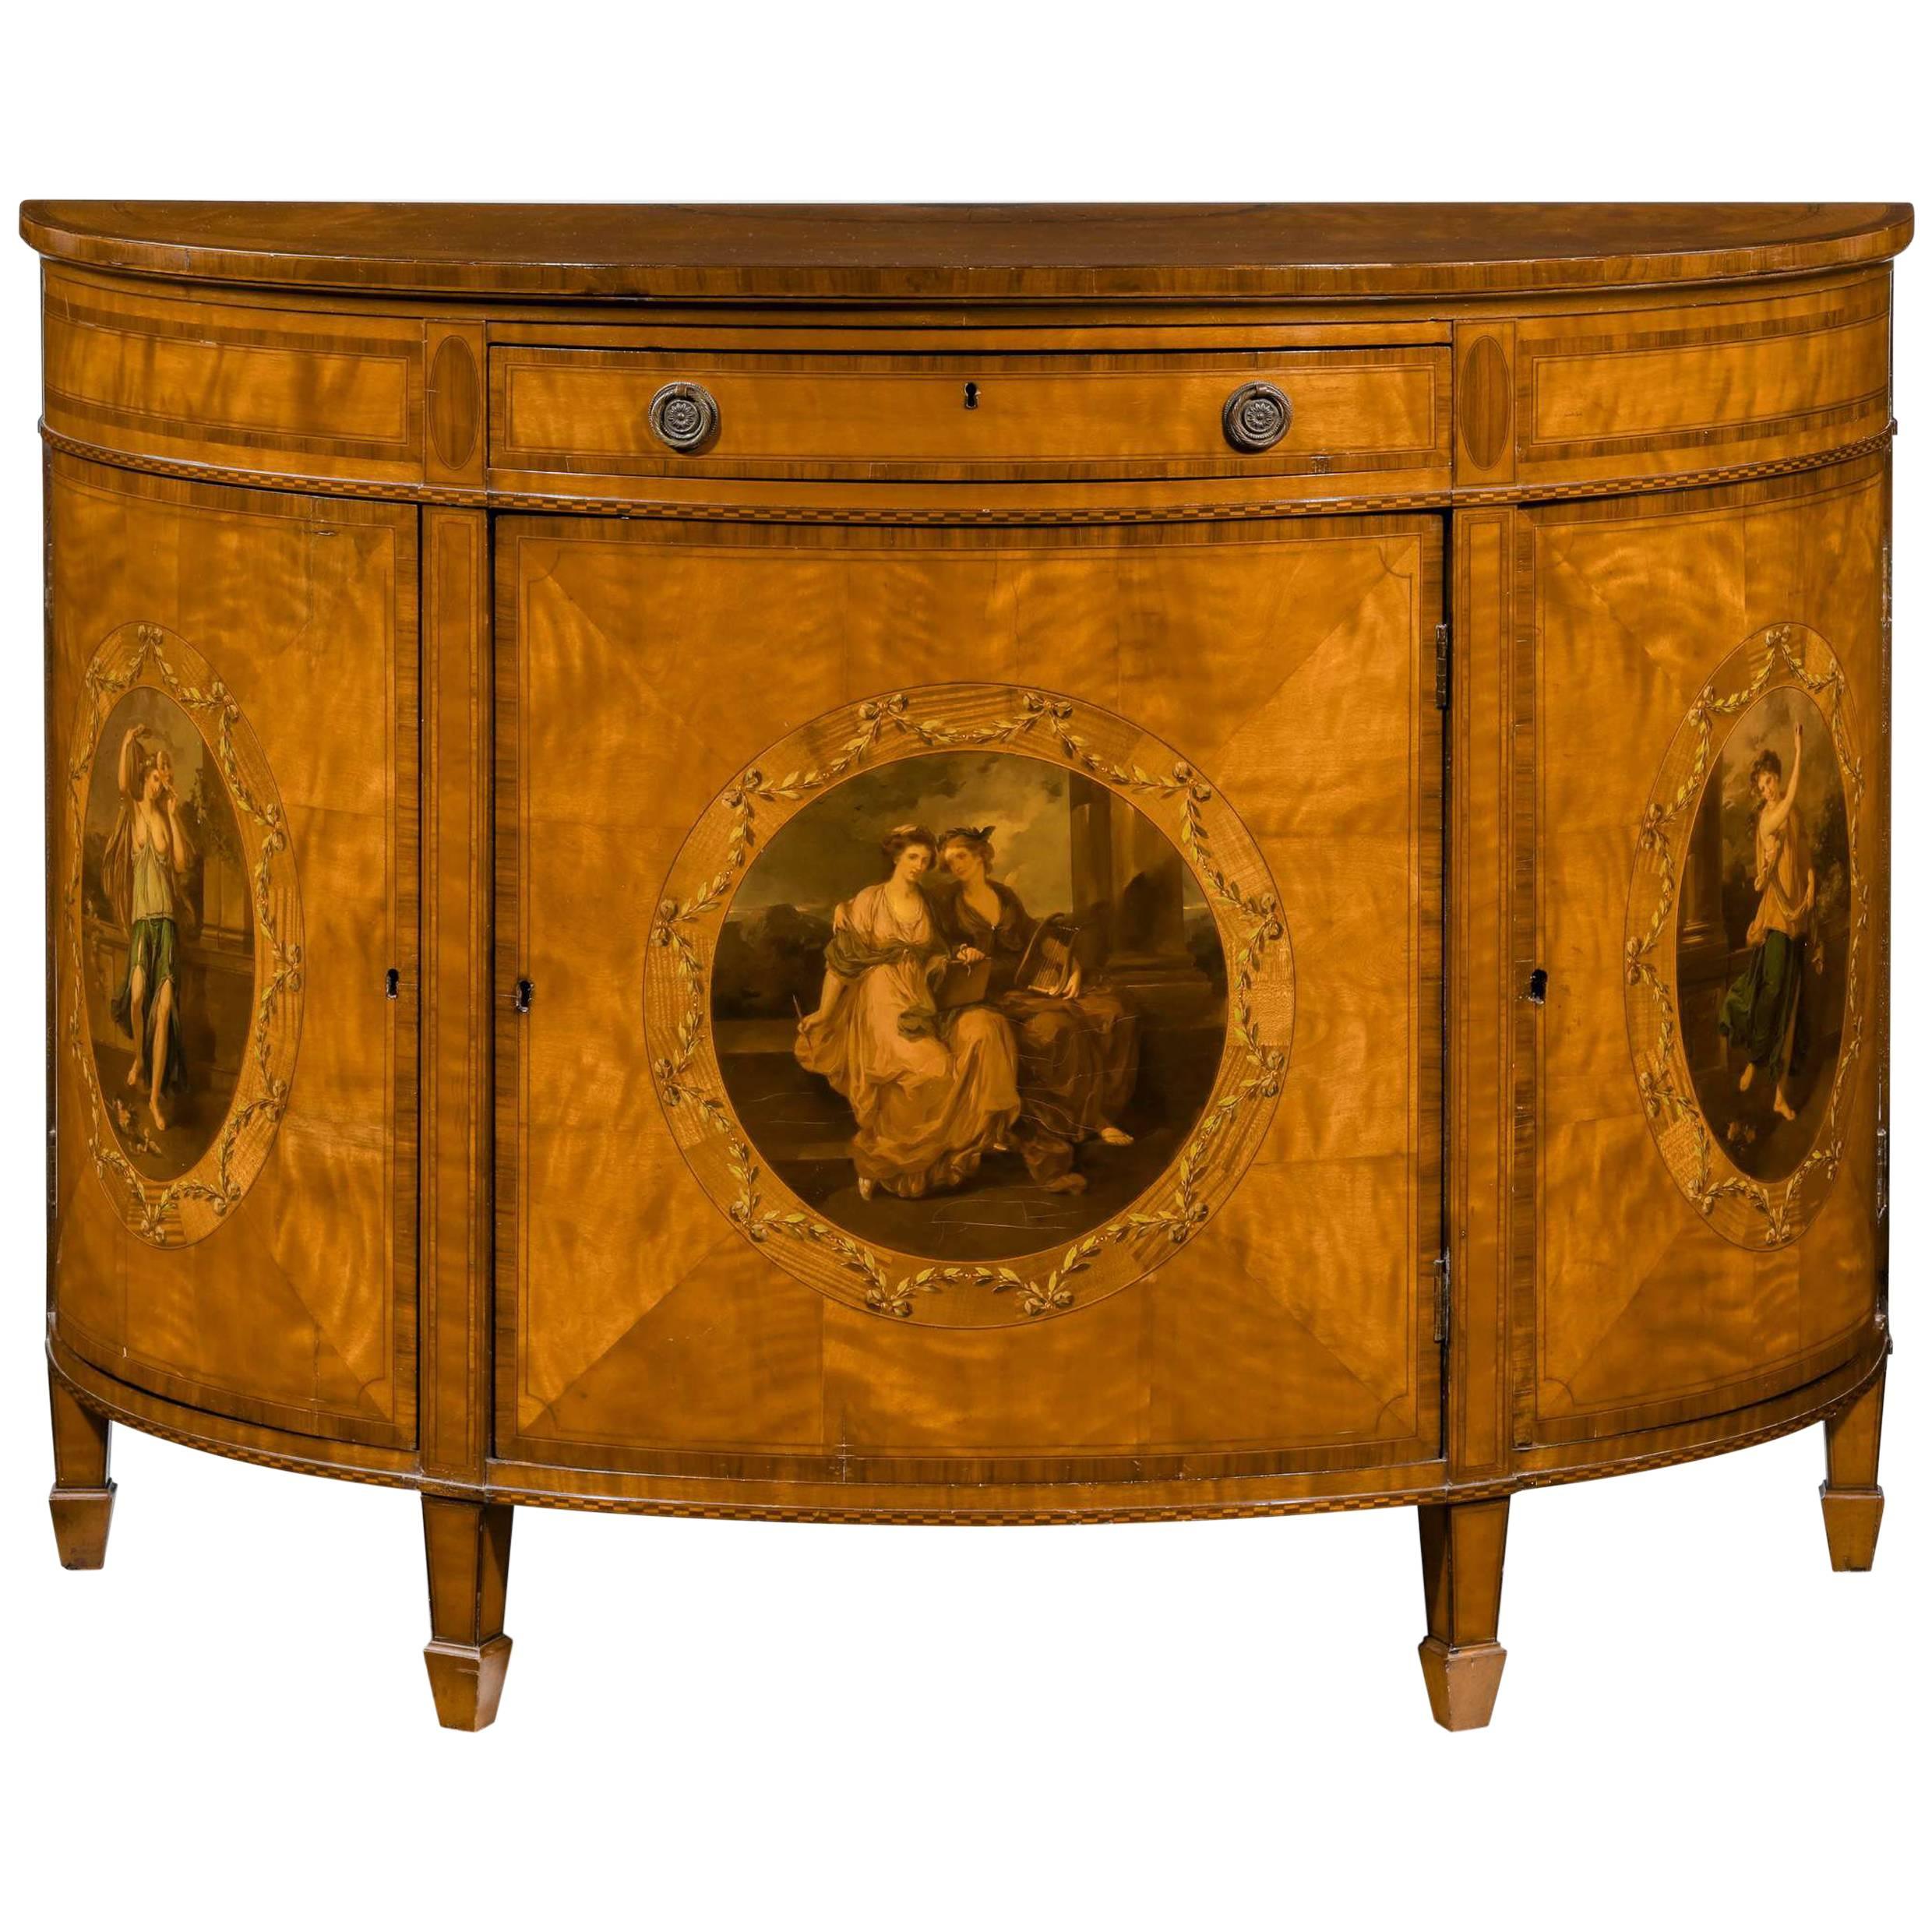 Late 19th Century Satinwood Demilune Commode